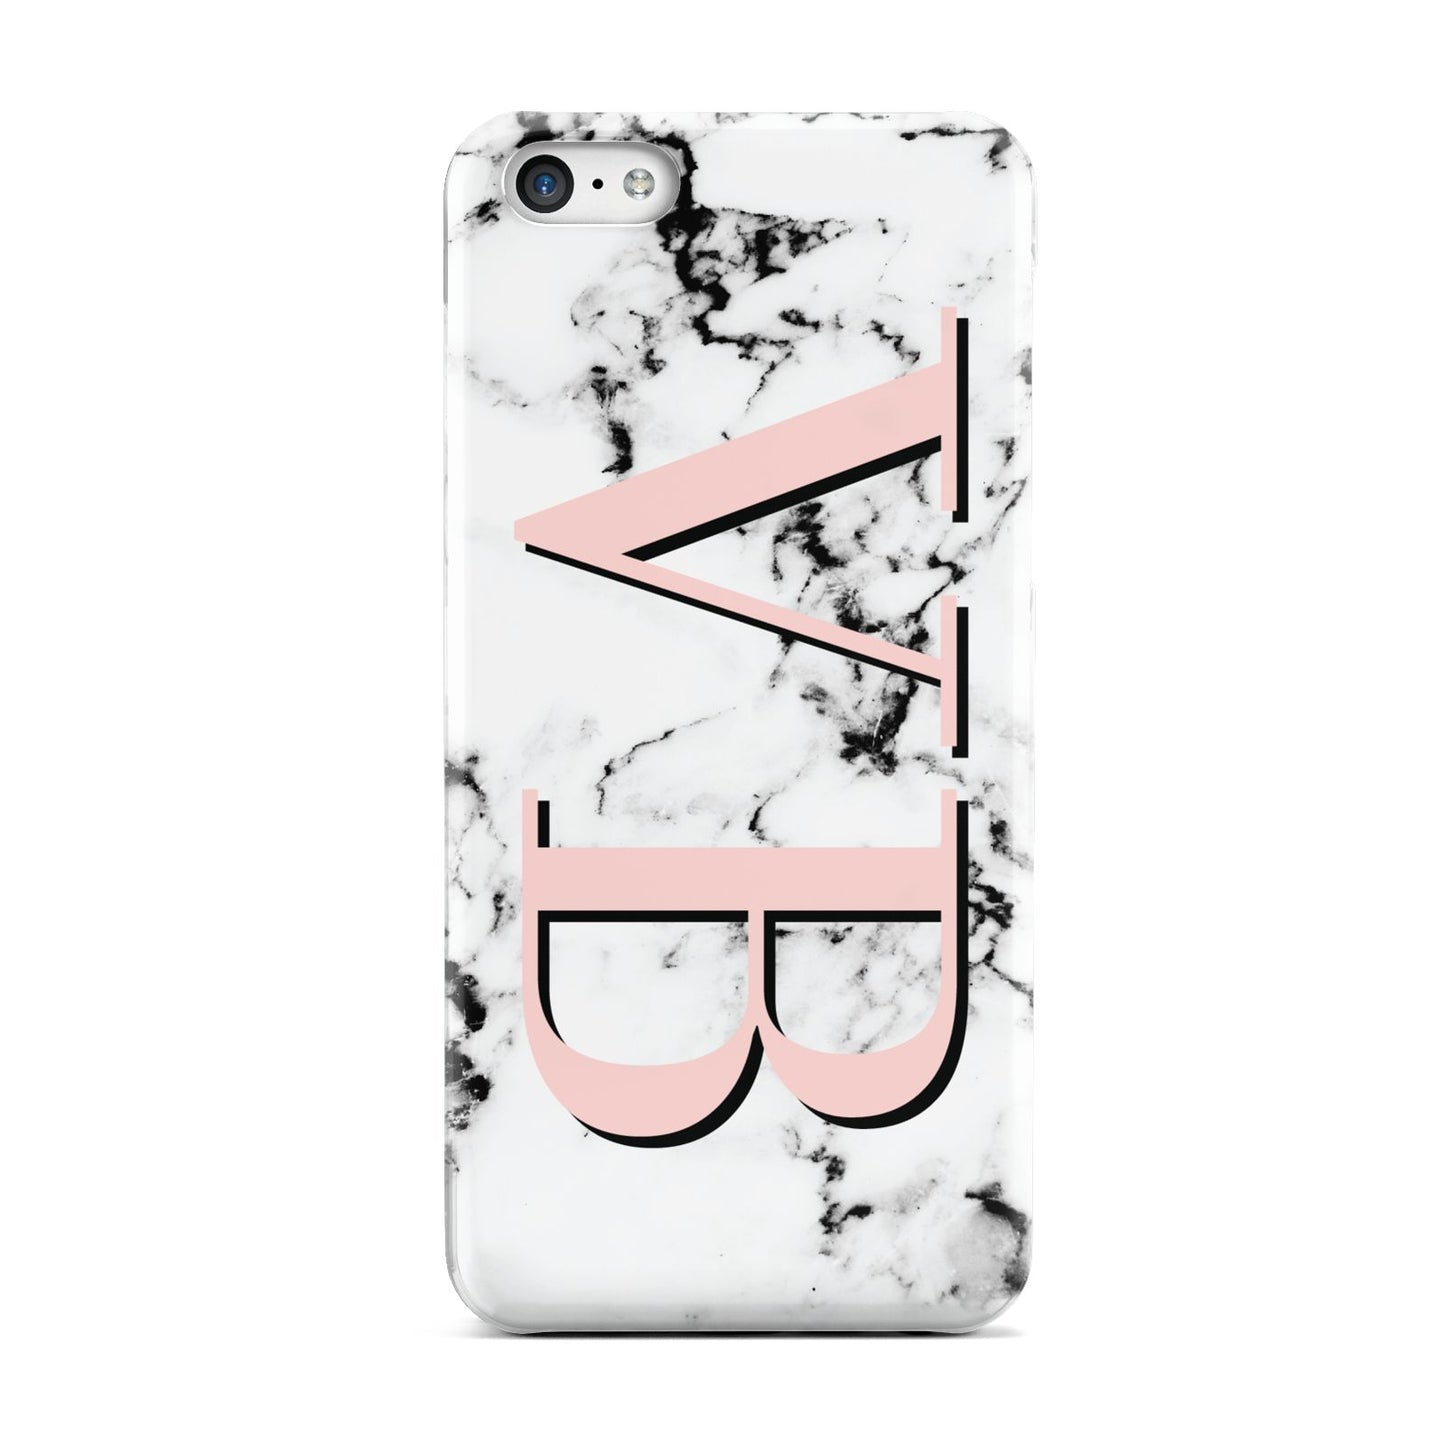 Personalised Coral Malble Initials Apple iPhone 5c Case